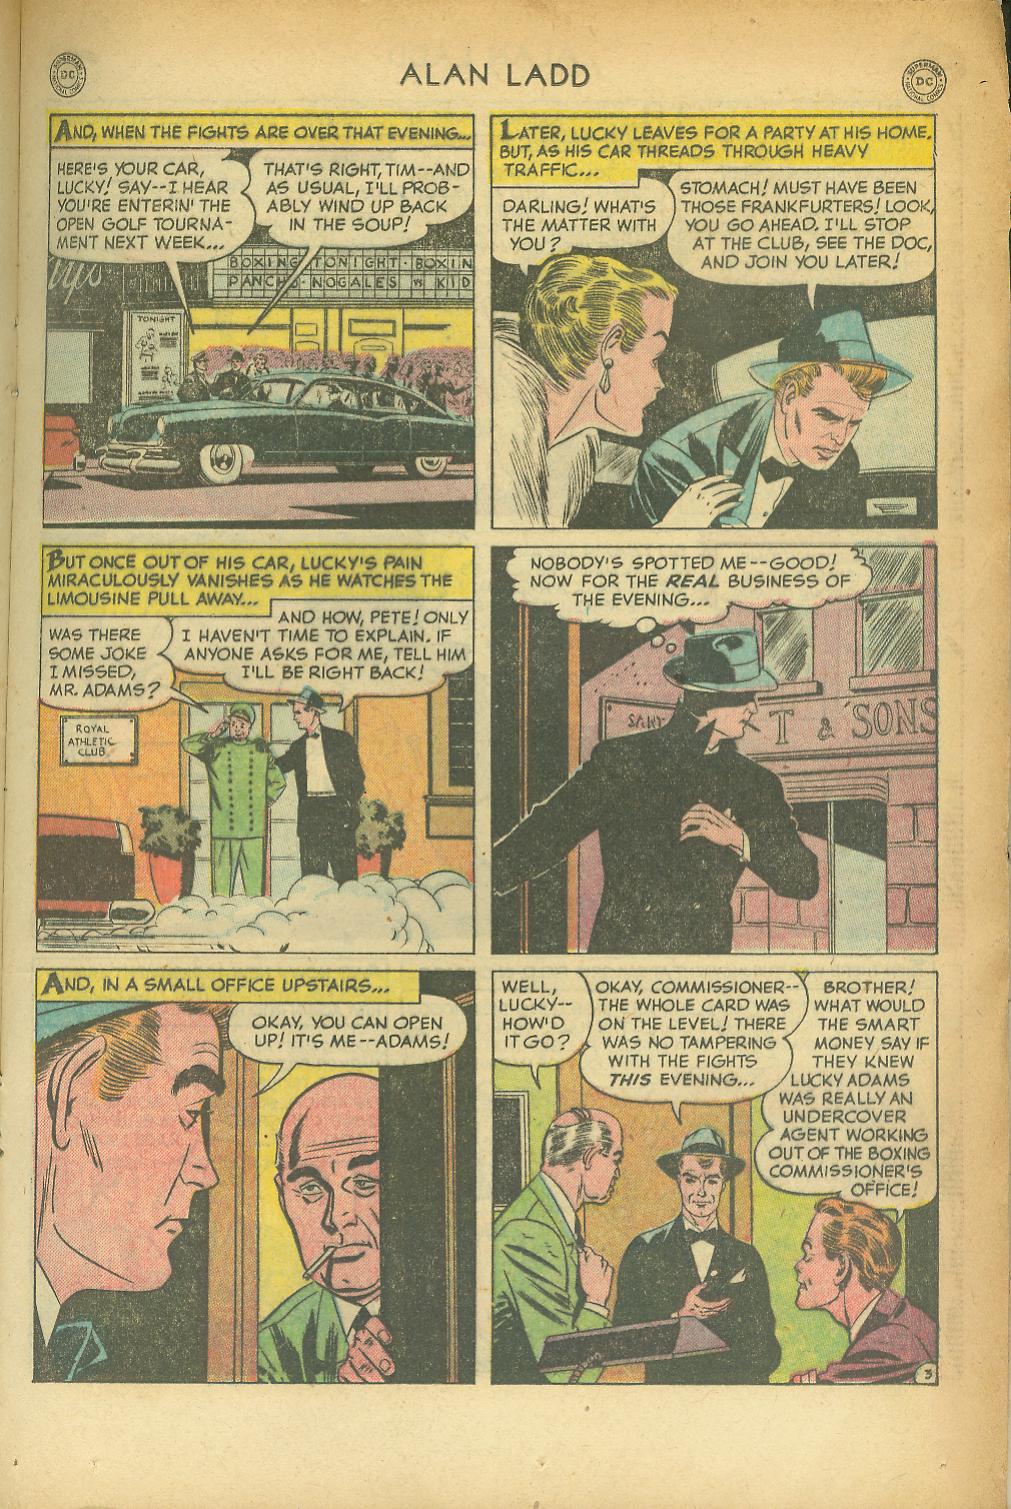 Read online Adventures of Alan Ladd comic -  Issue #8 - 23